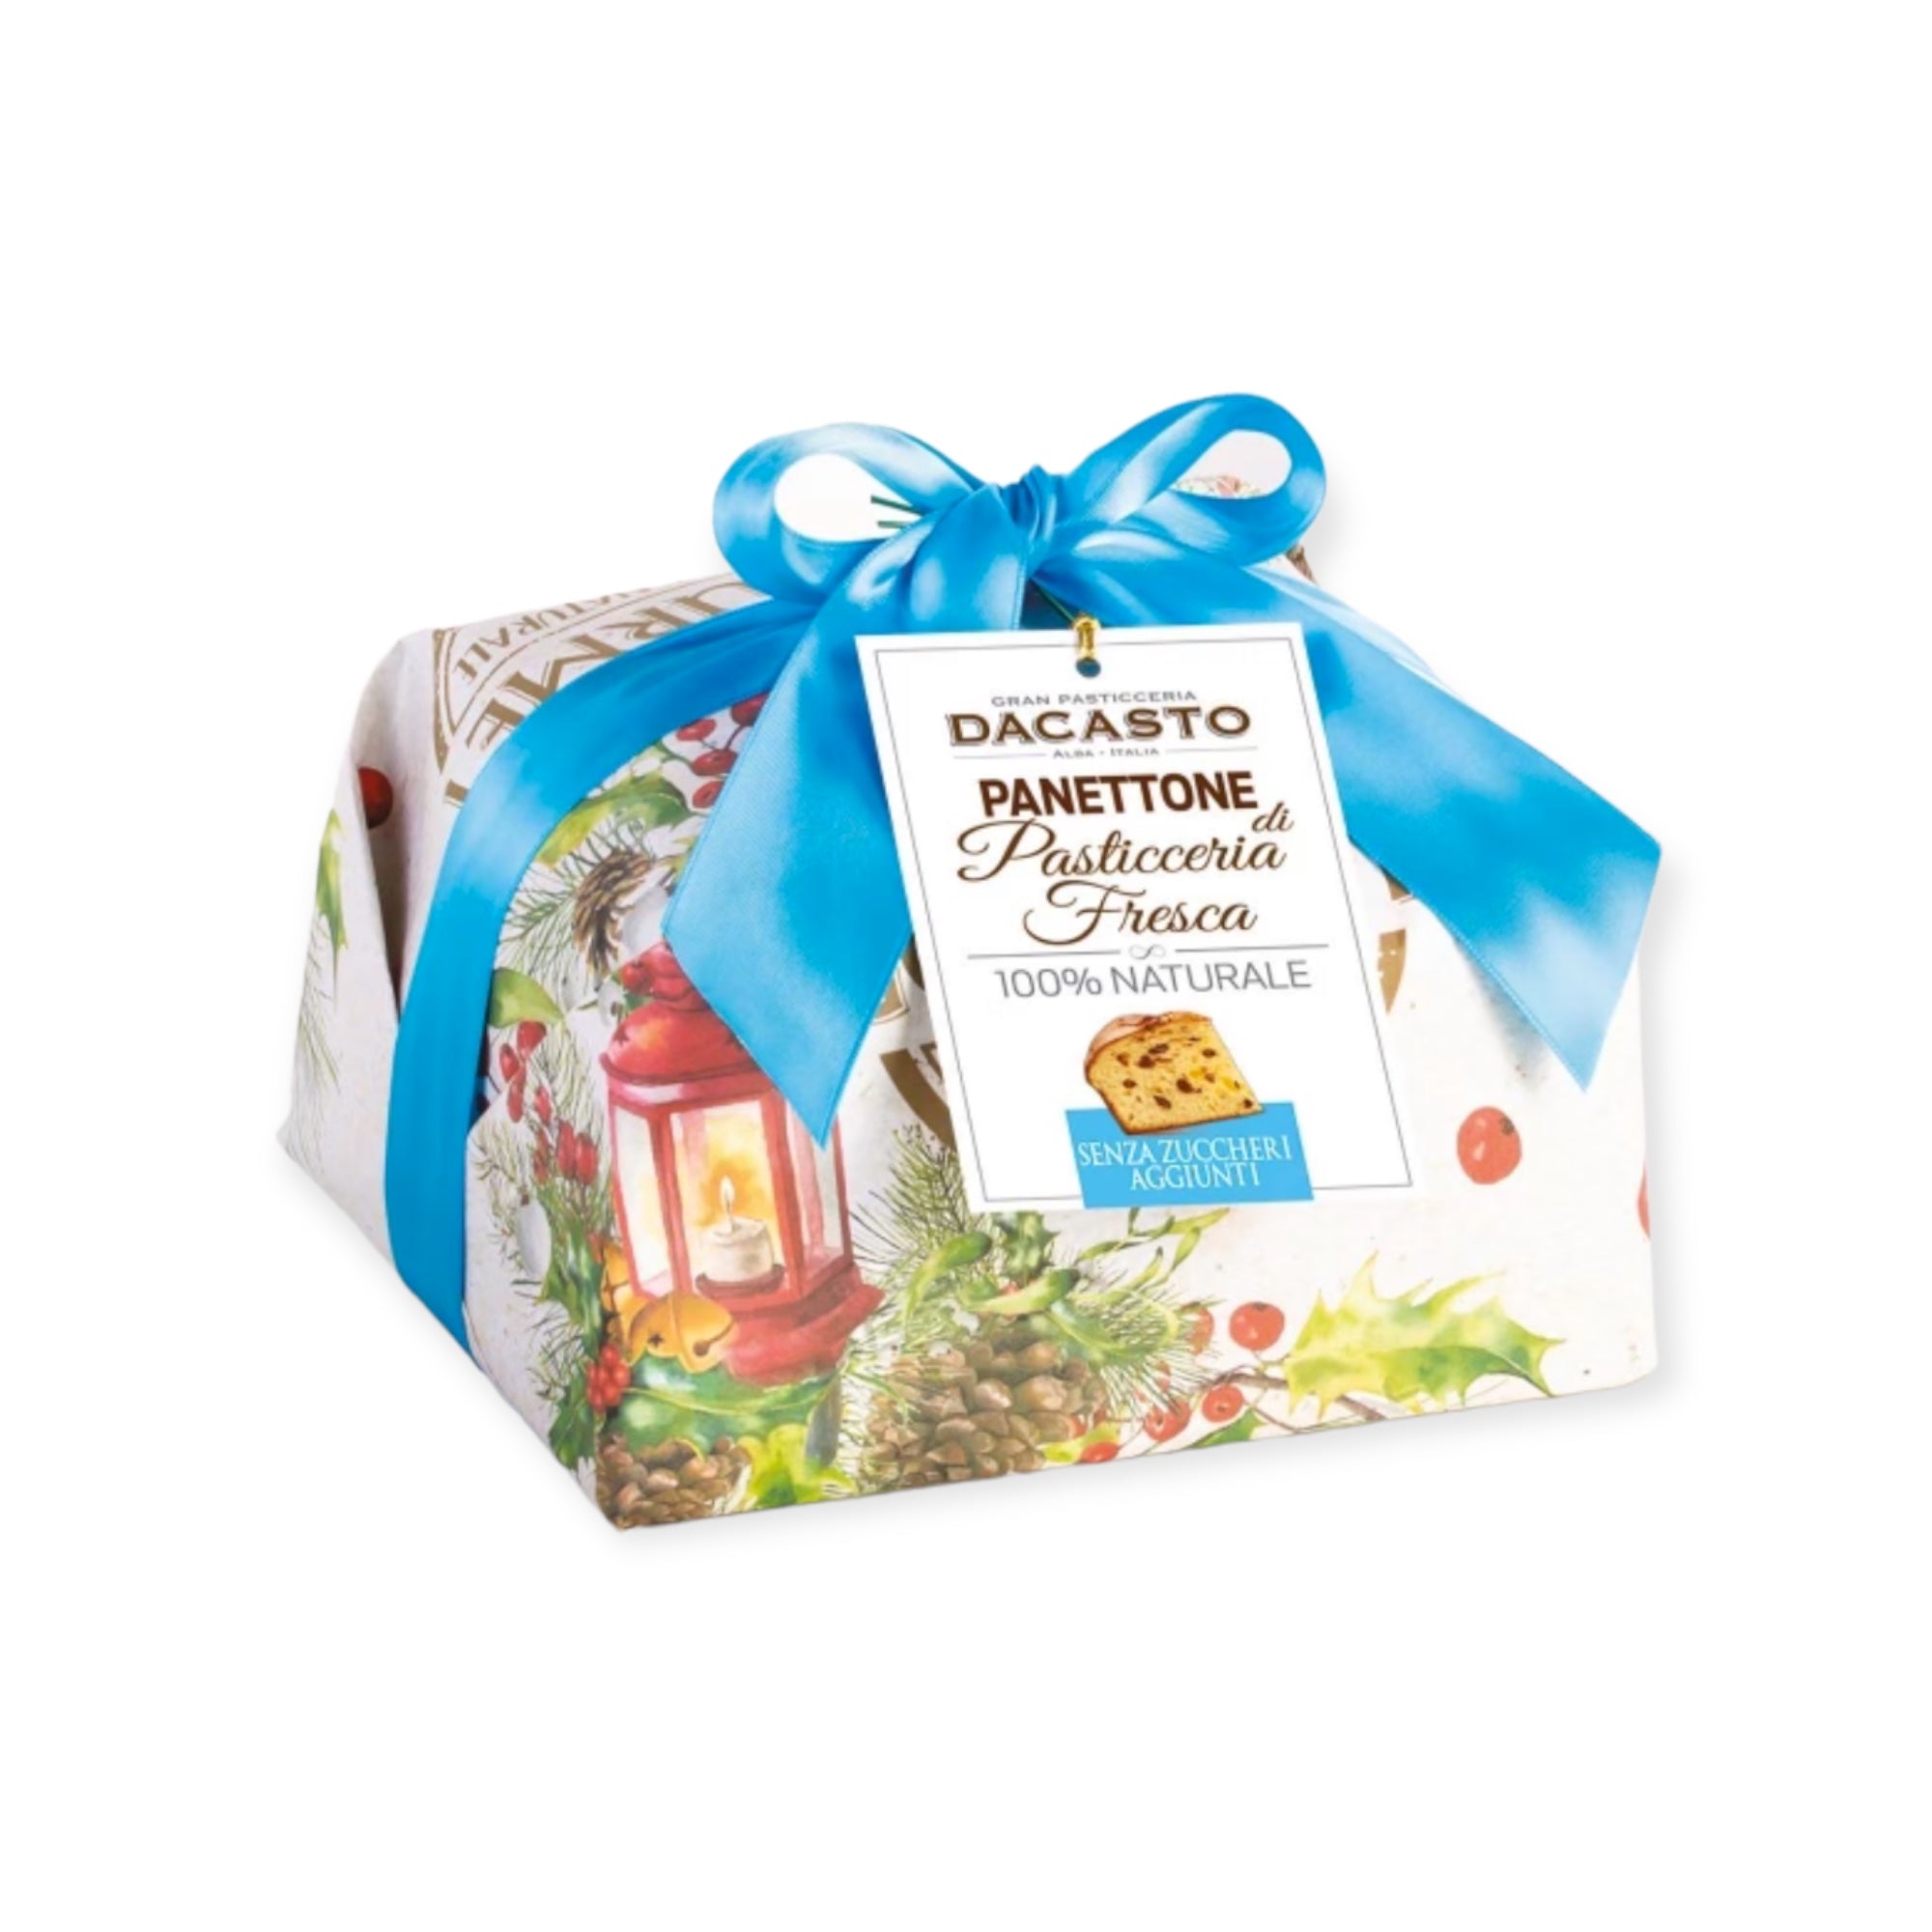 Panettone 100% Natural, Sugar Free By Dacasto